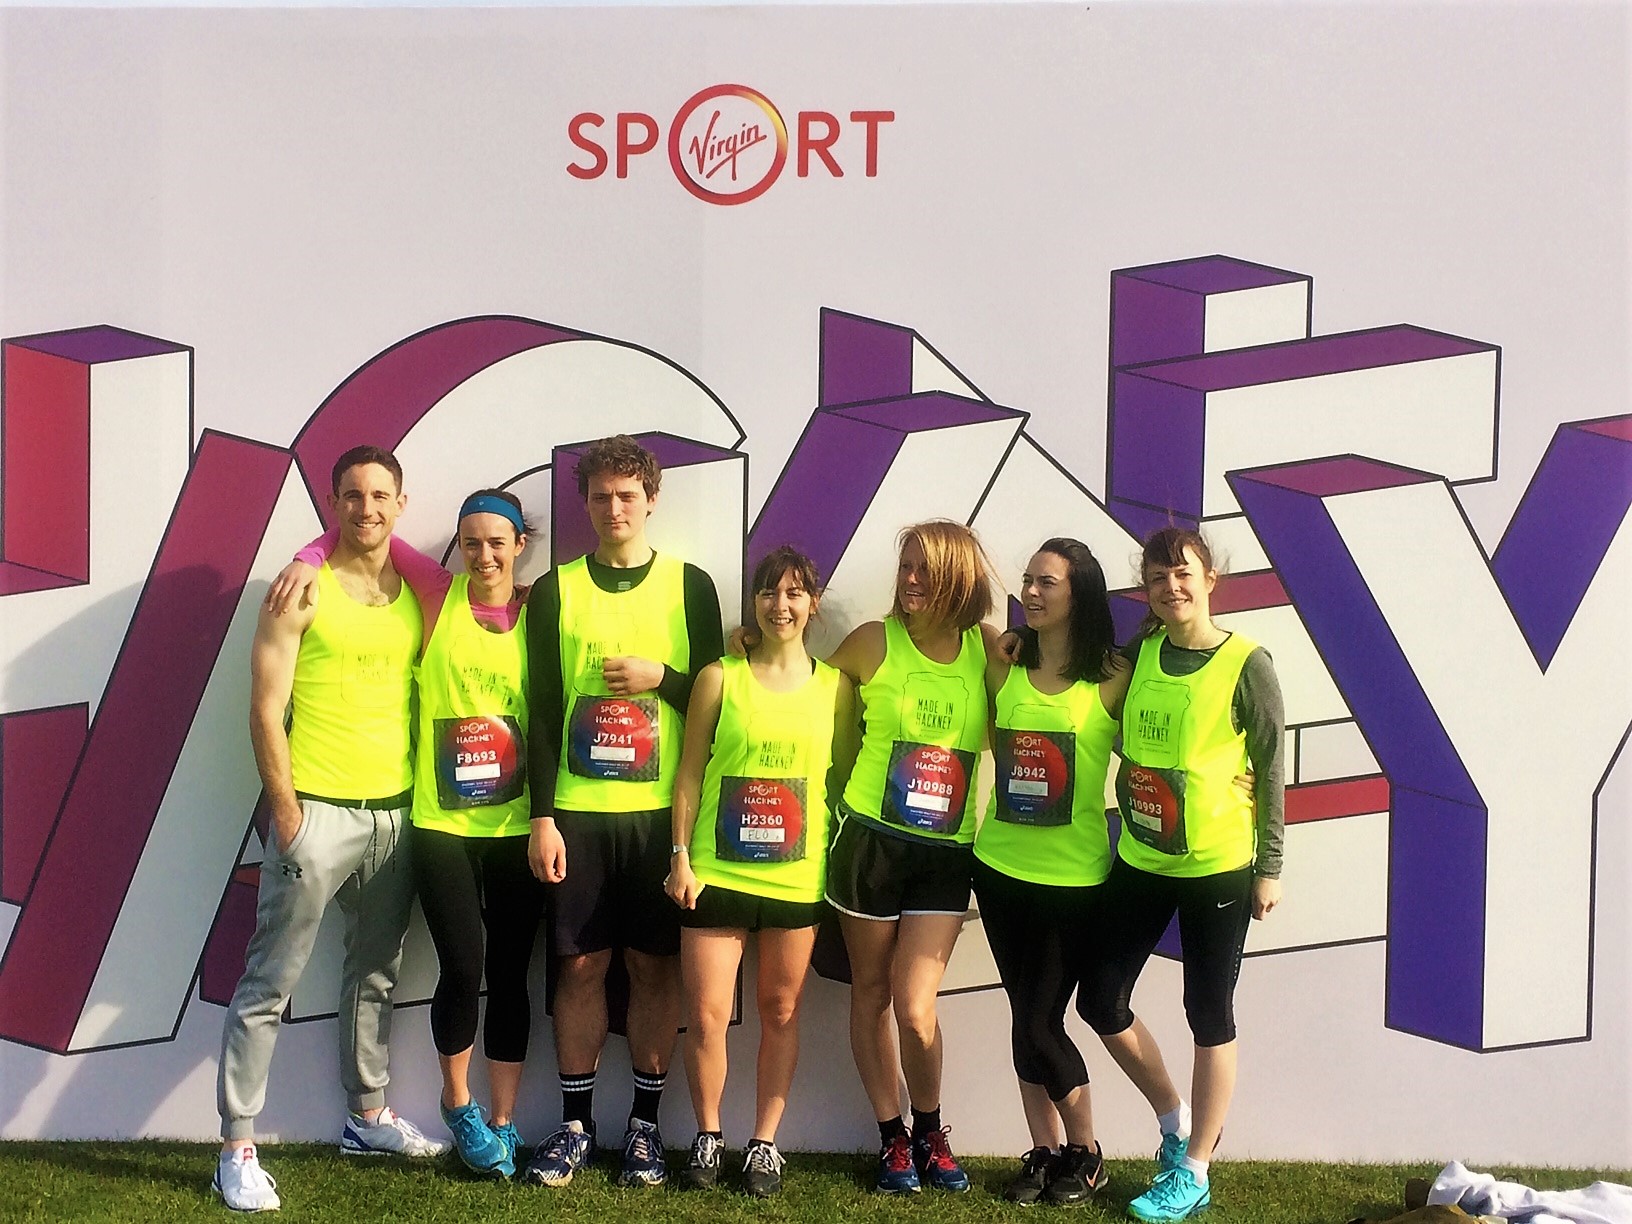 Will you run for us in the Hackney Half Marathon on 19th May?